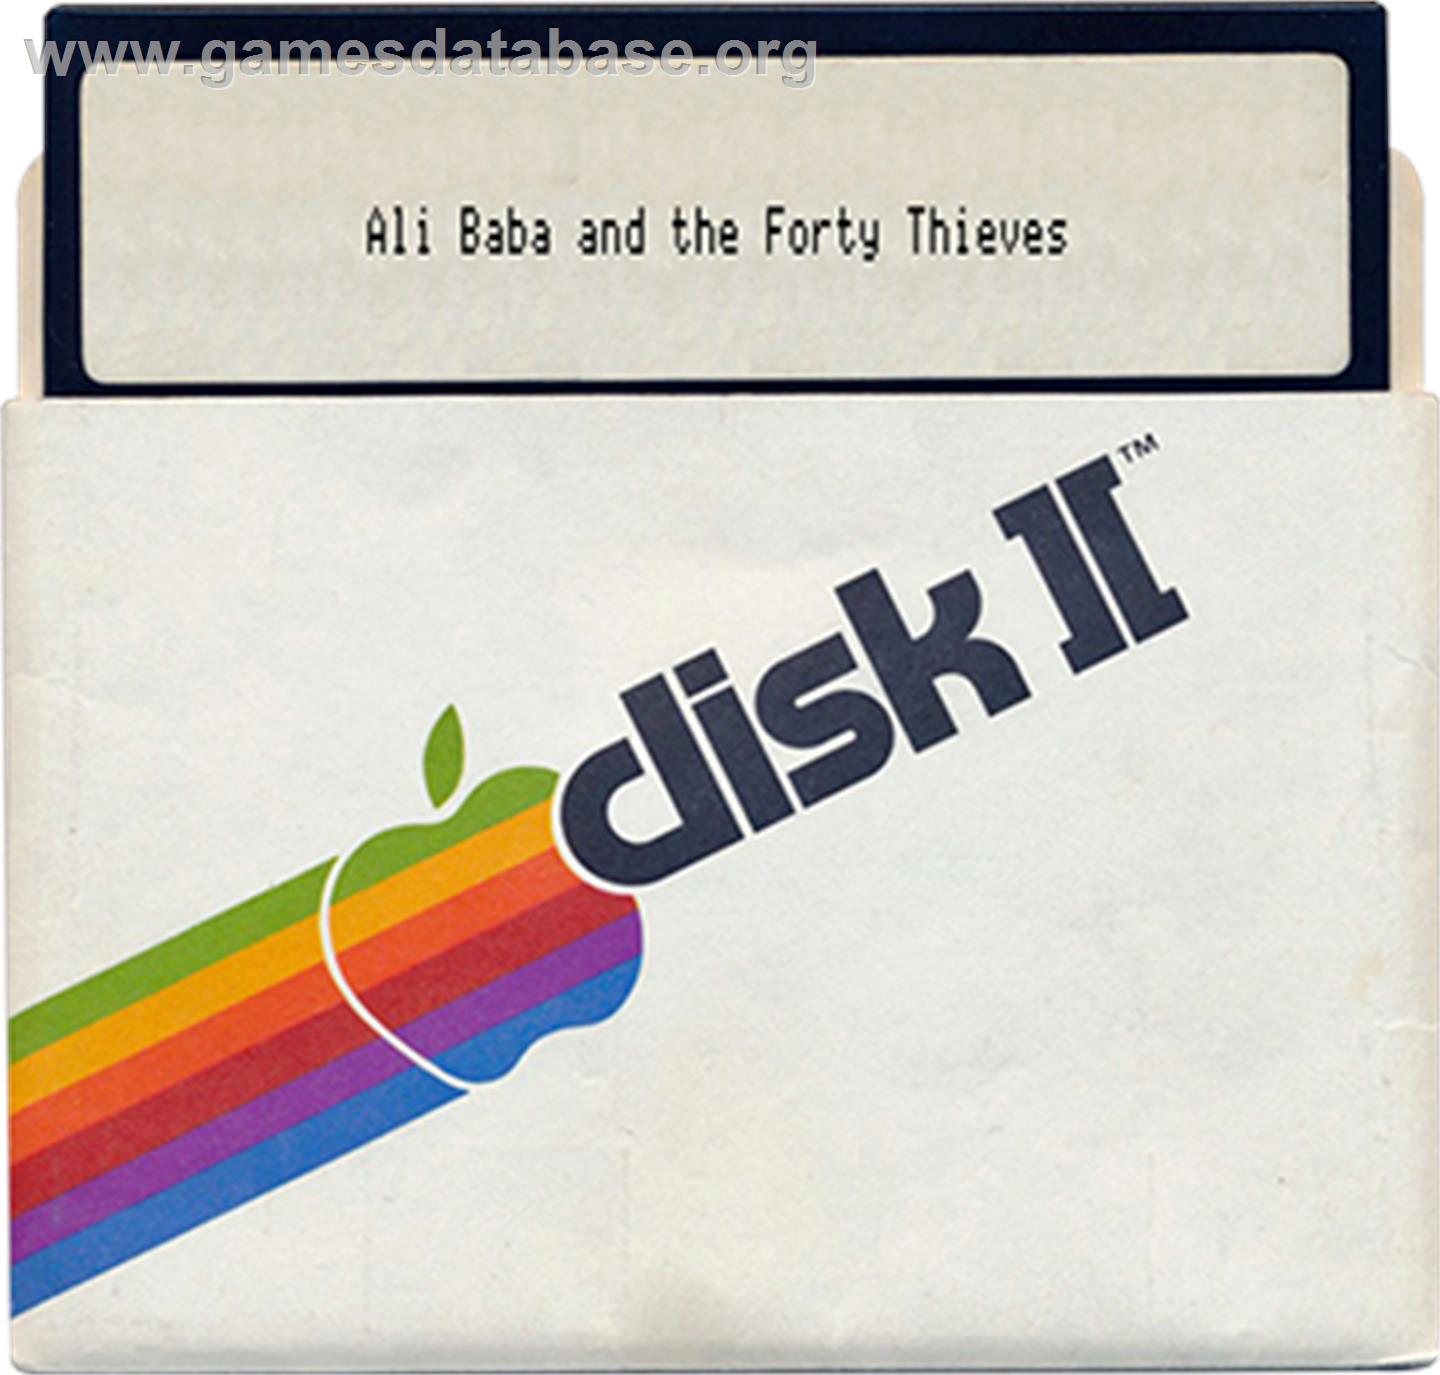 Ali Baba and the Forty Thieves - Apple II - Artwork - Disc